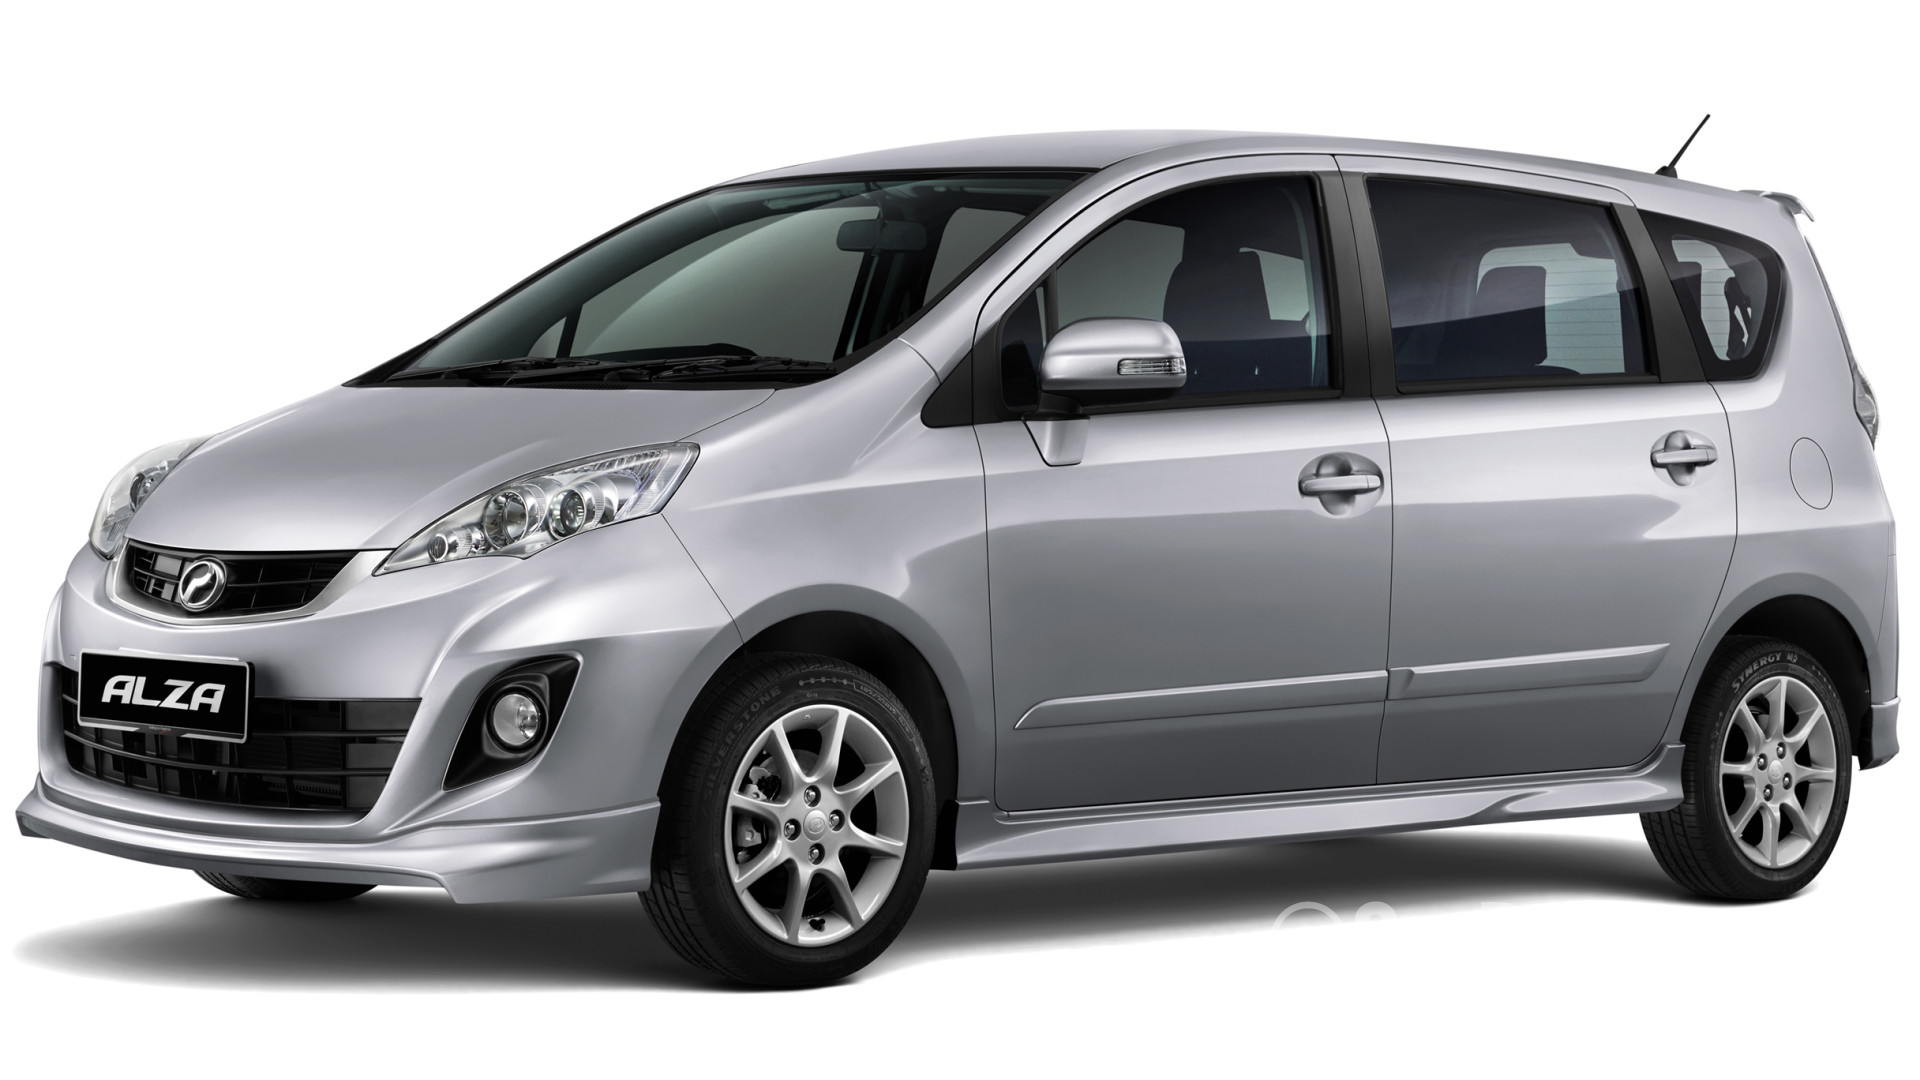 Perodua Alza Mk1 Facelift 2 (2018) Exterior Image in Malaysia  Reviews, Specs, Prices  CarBase.my